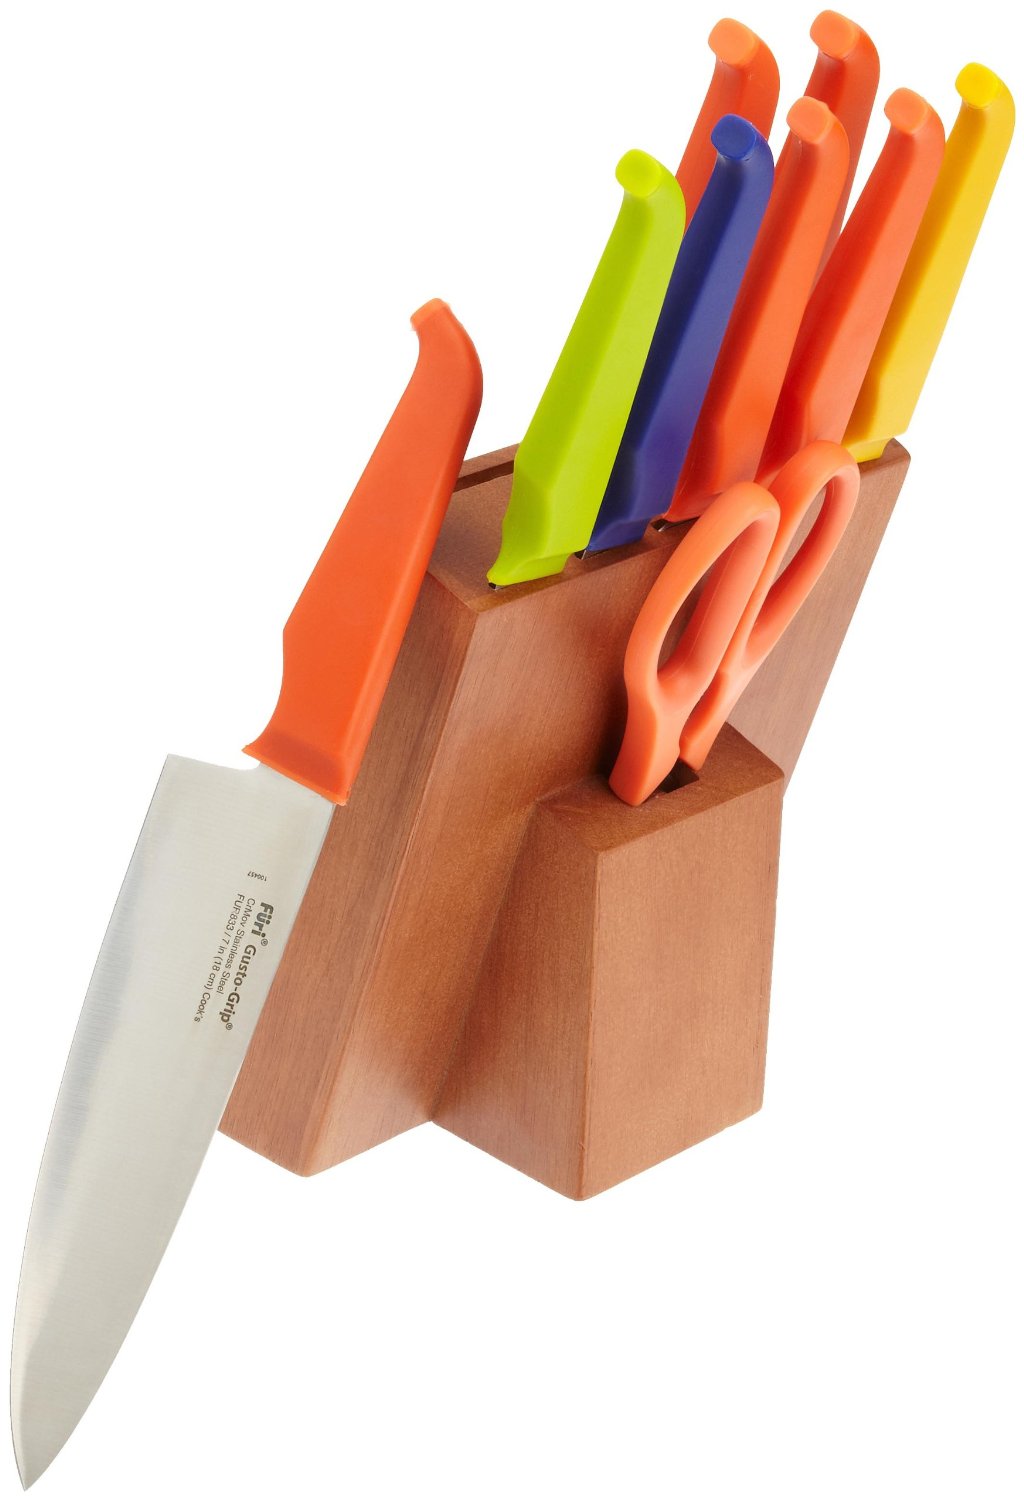 Hurry Rachael Ray Gusto Grip 10 Piece Knife Block Set only $37.29!!! -  Living Chic Mom